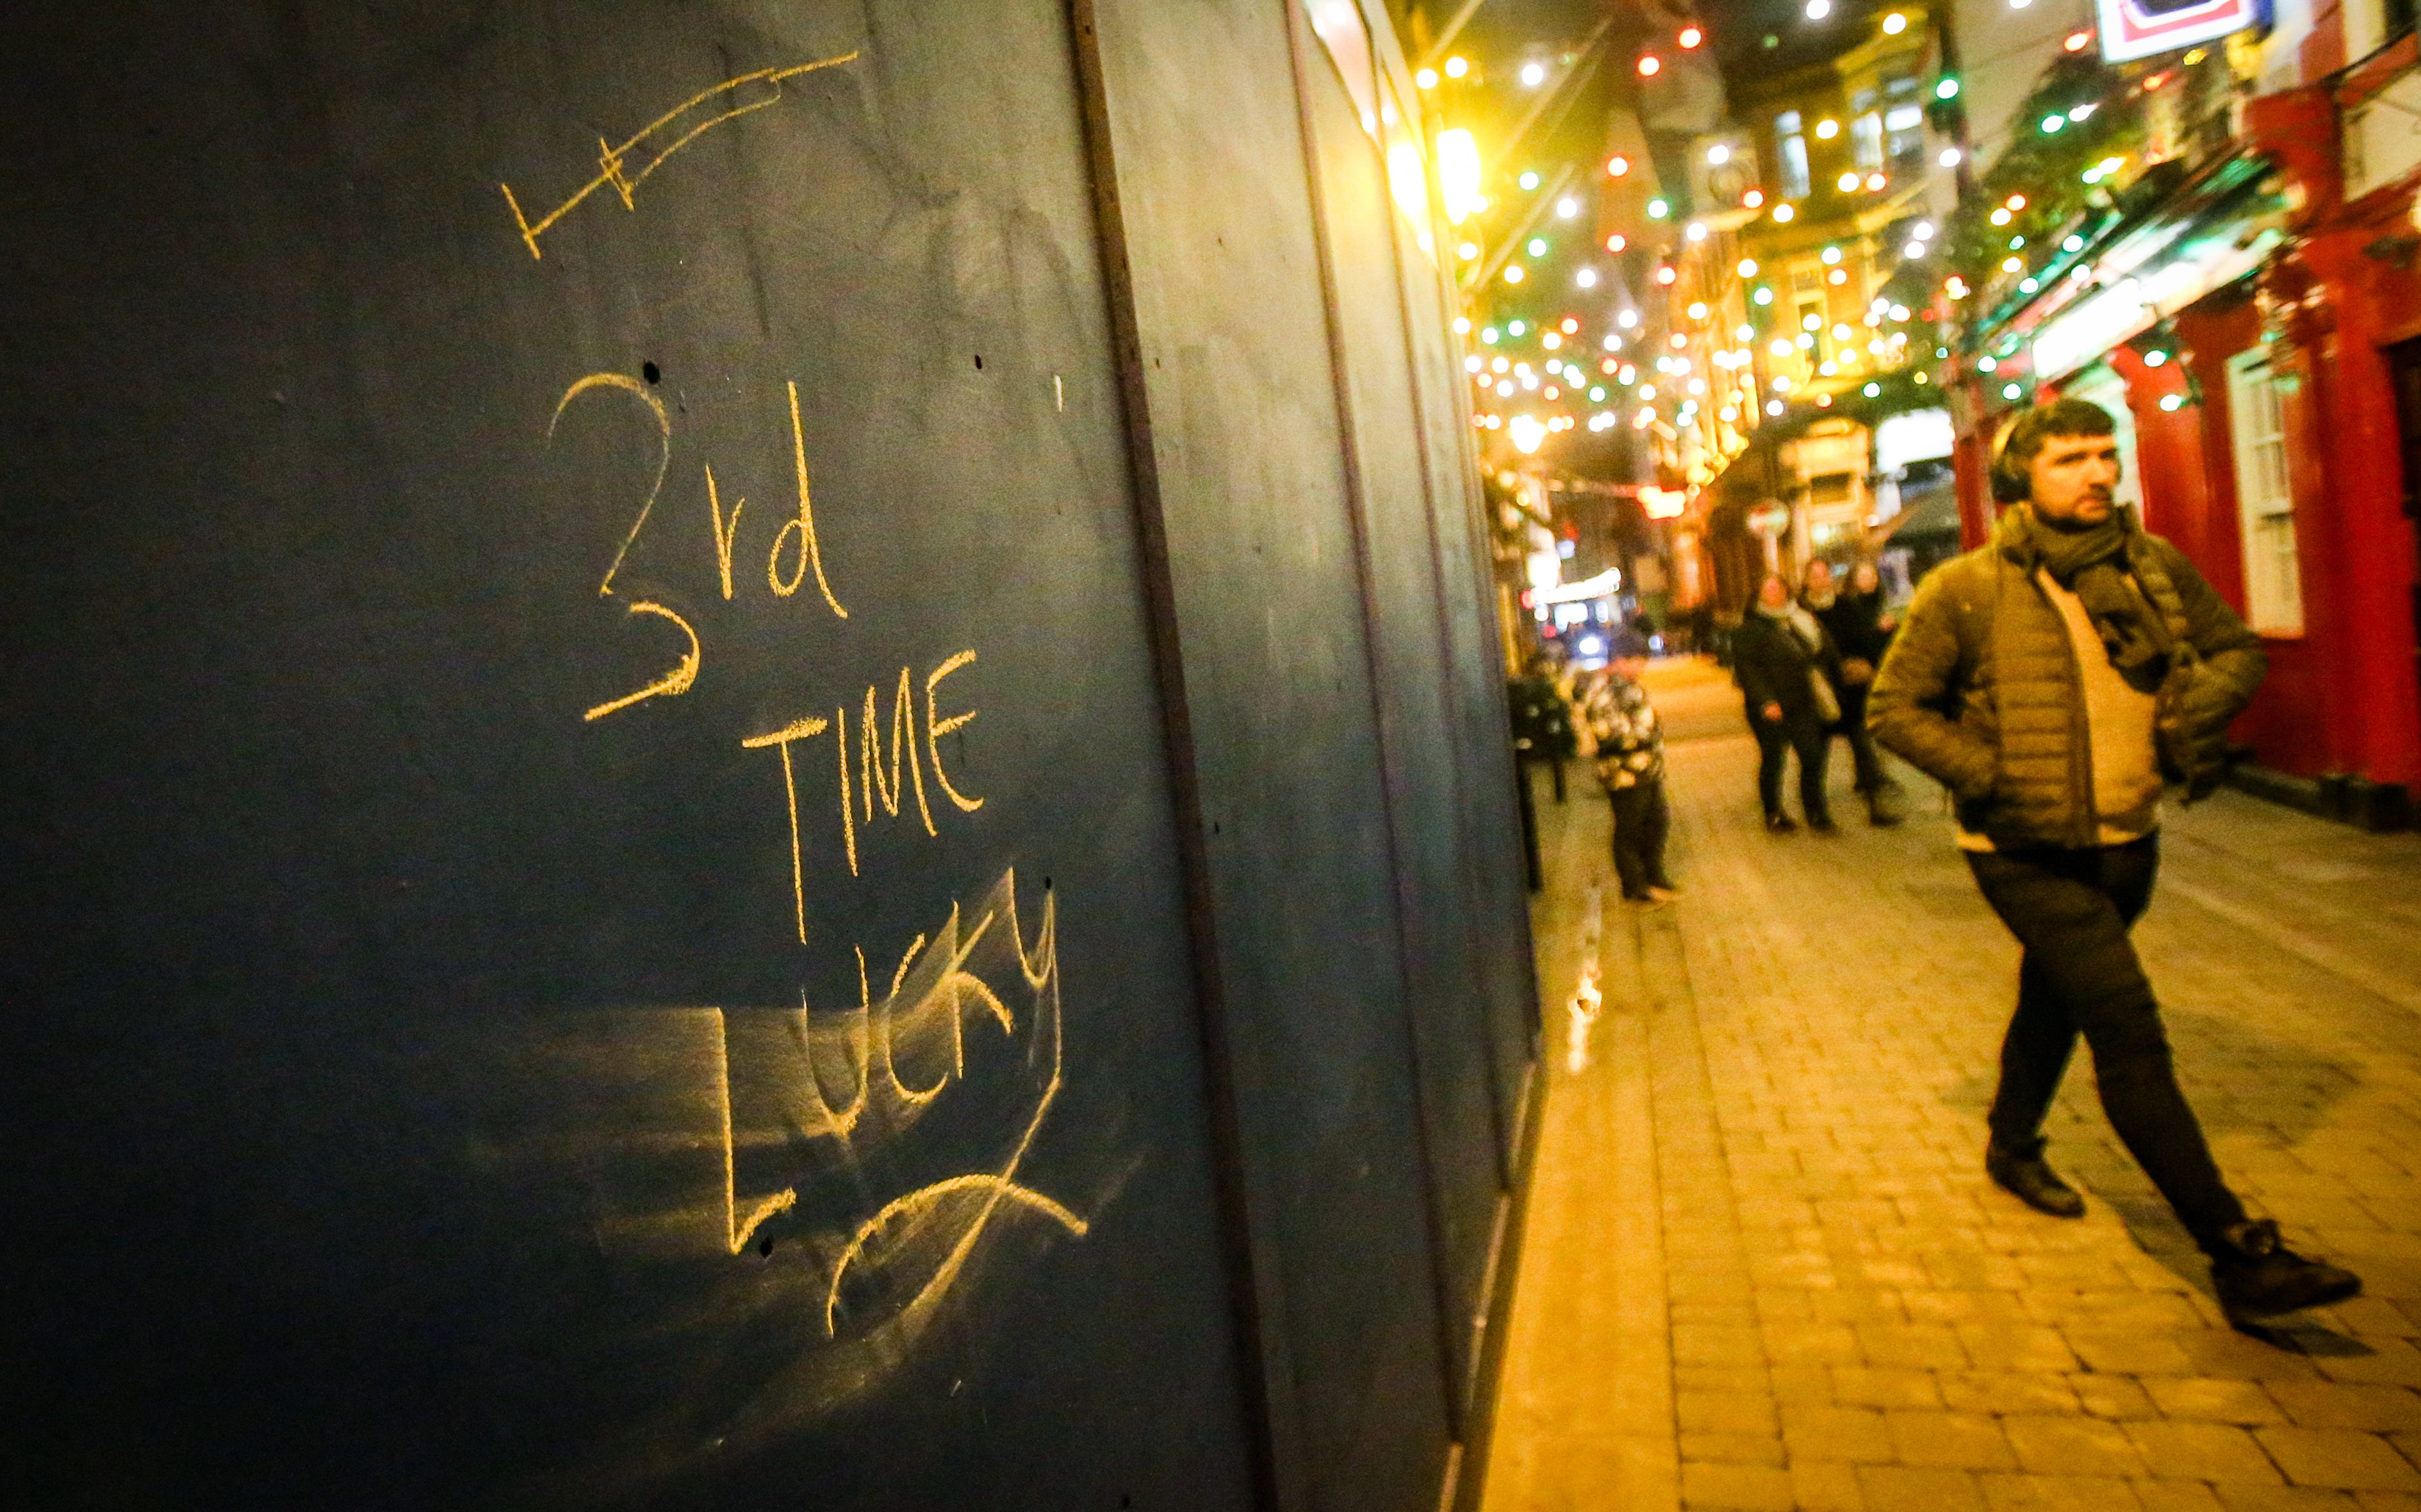 A man walks past Covid vaccine graffiti in Dublin this evening, ahead of a new 8pm closing time for pubs and restaurants in Ireland (Damien Storan/PA)